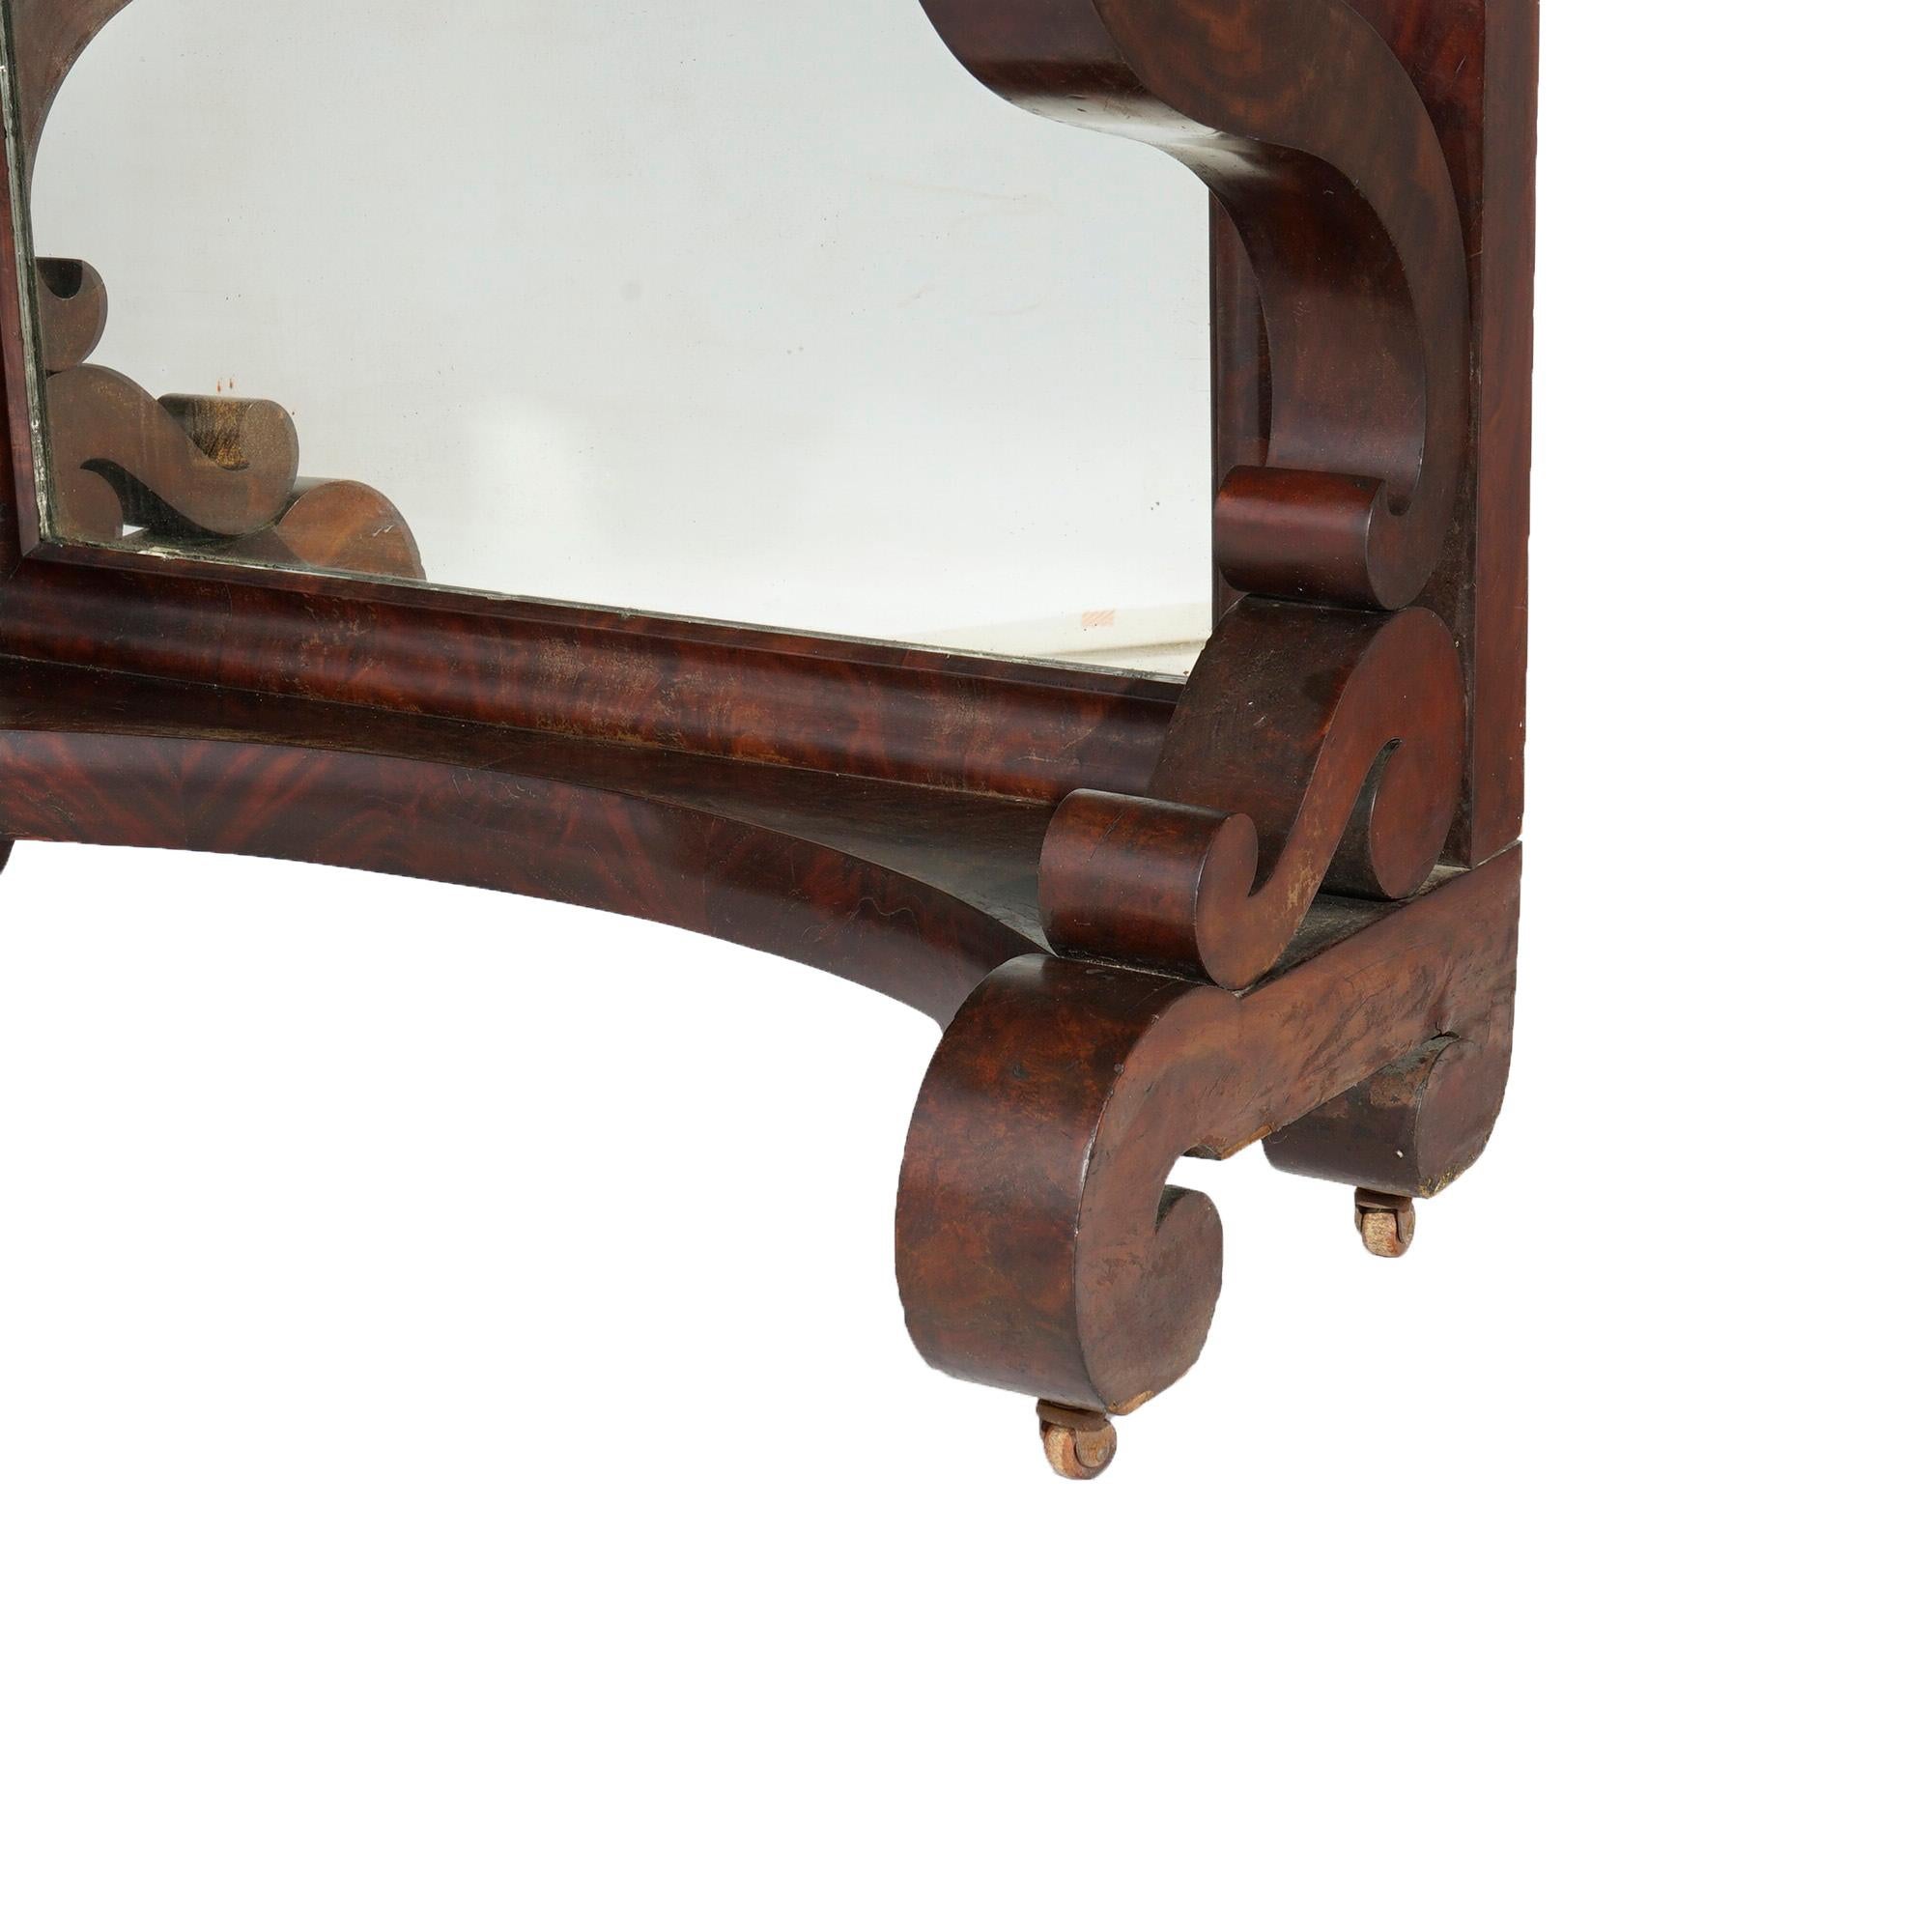 Antique American Empire Flame Mahogany Scroll Form Mirrored Pier Table, c1840 15